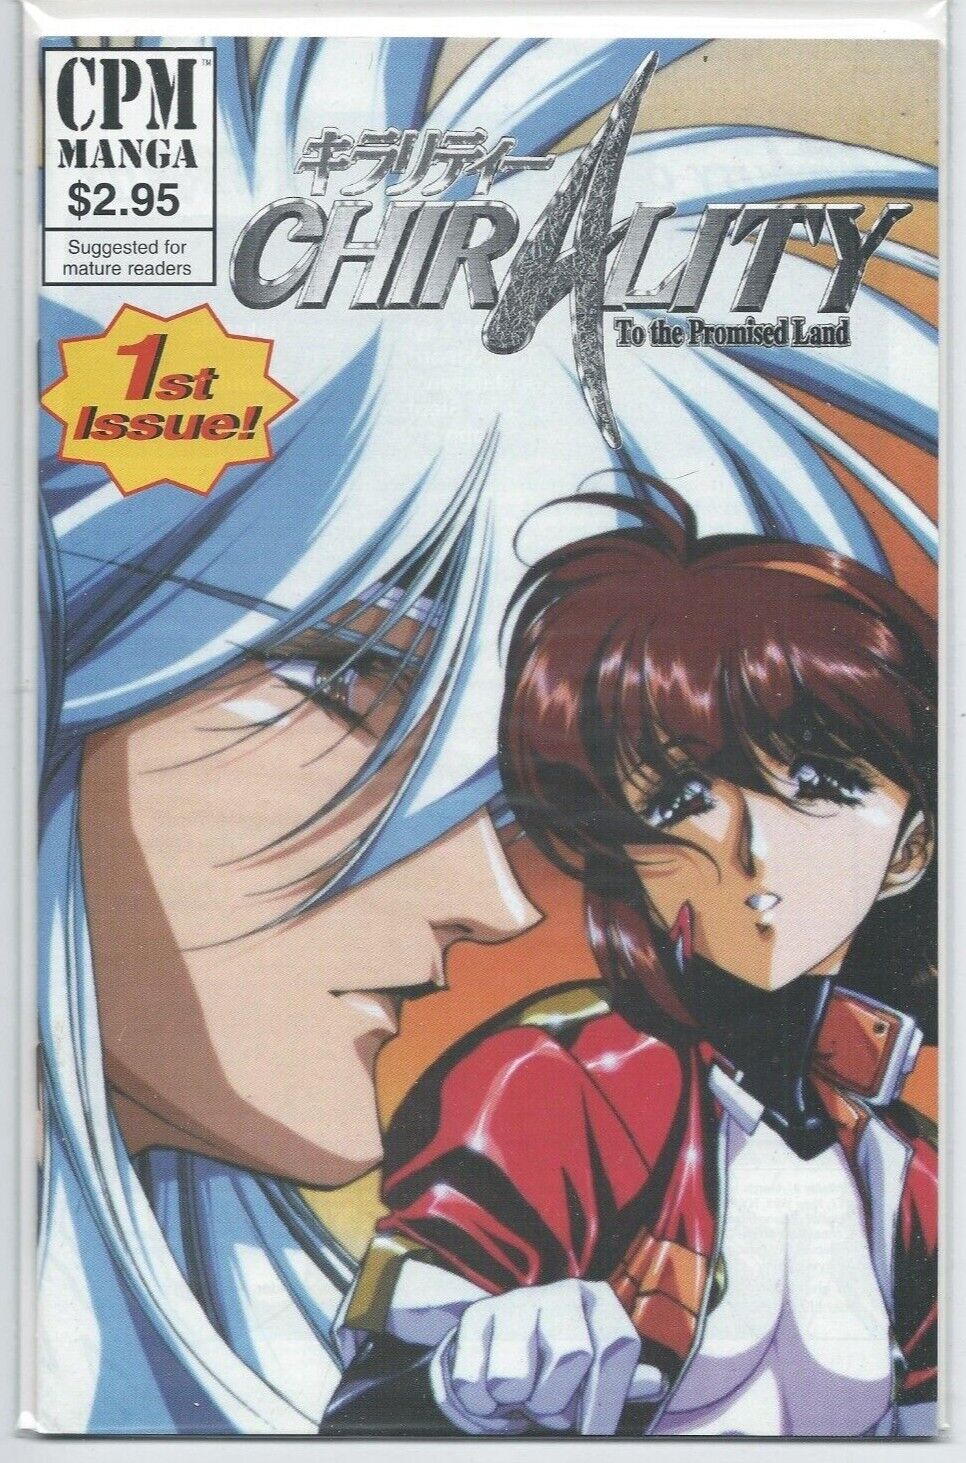  CHIRALITY to the PROMISED LAND #1st /#2 Newstand Editions Mint unread CPM Manga